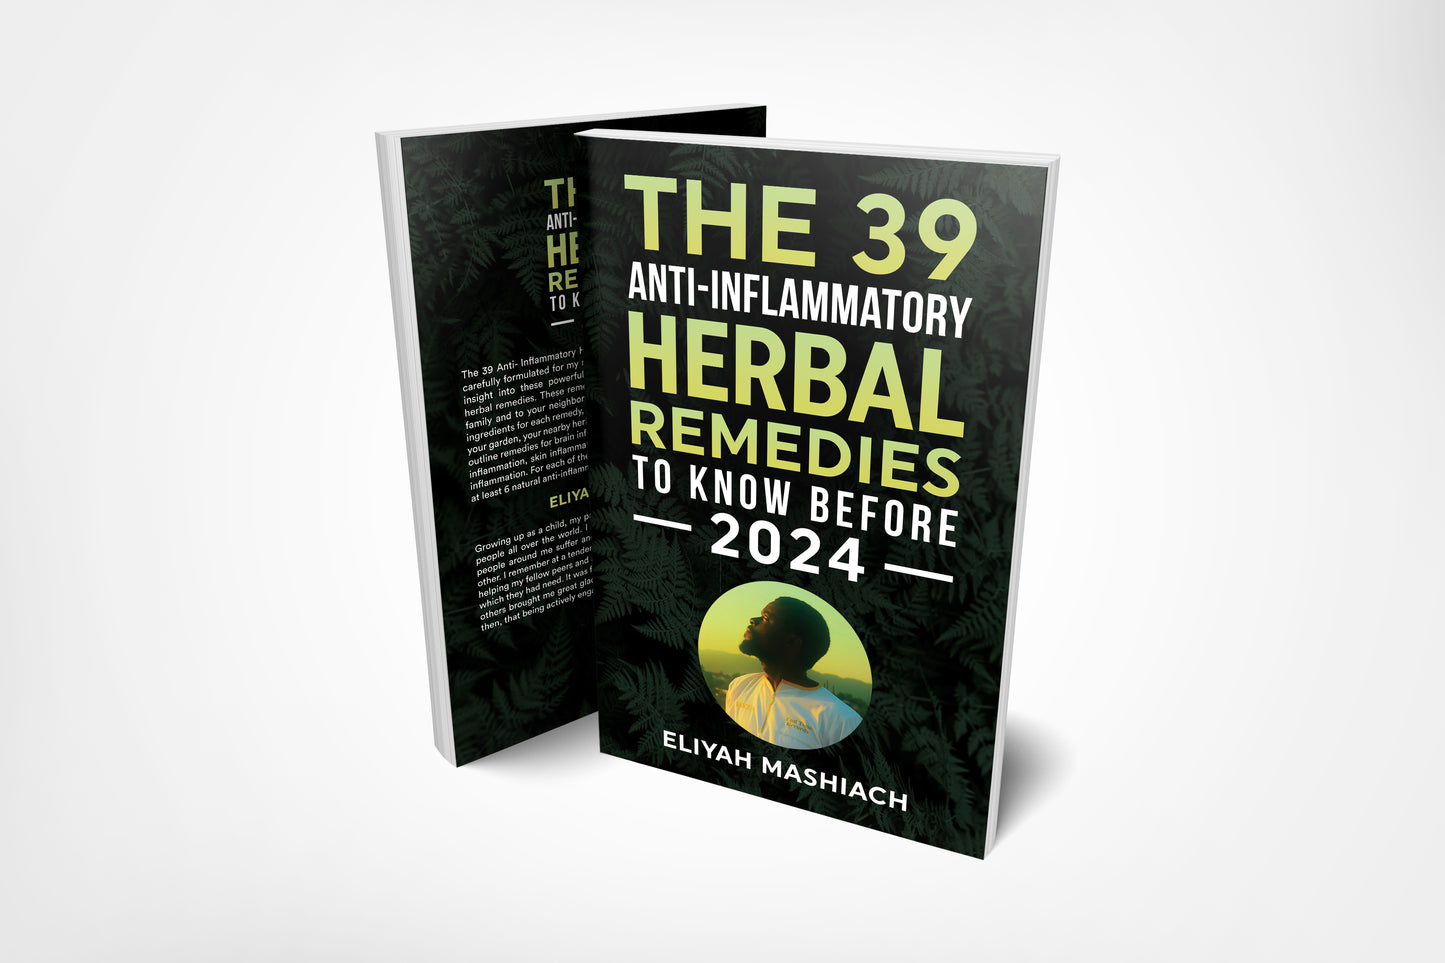 THE 39 ANTI-INFLAMMATORY HERBAL REMEDIES TO KNOW ABOUT BEFORE 2024